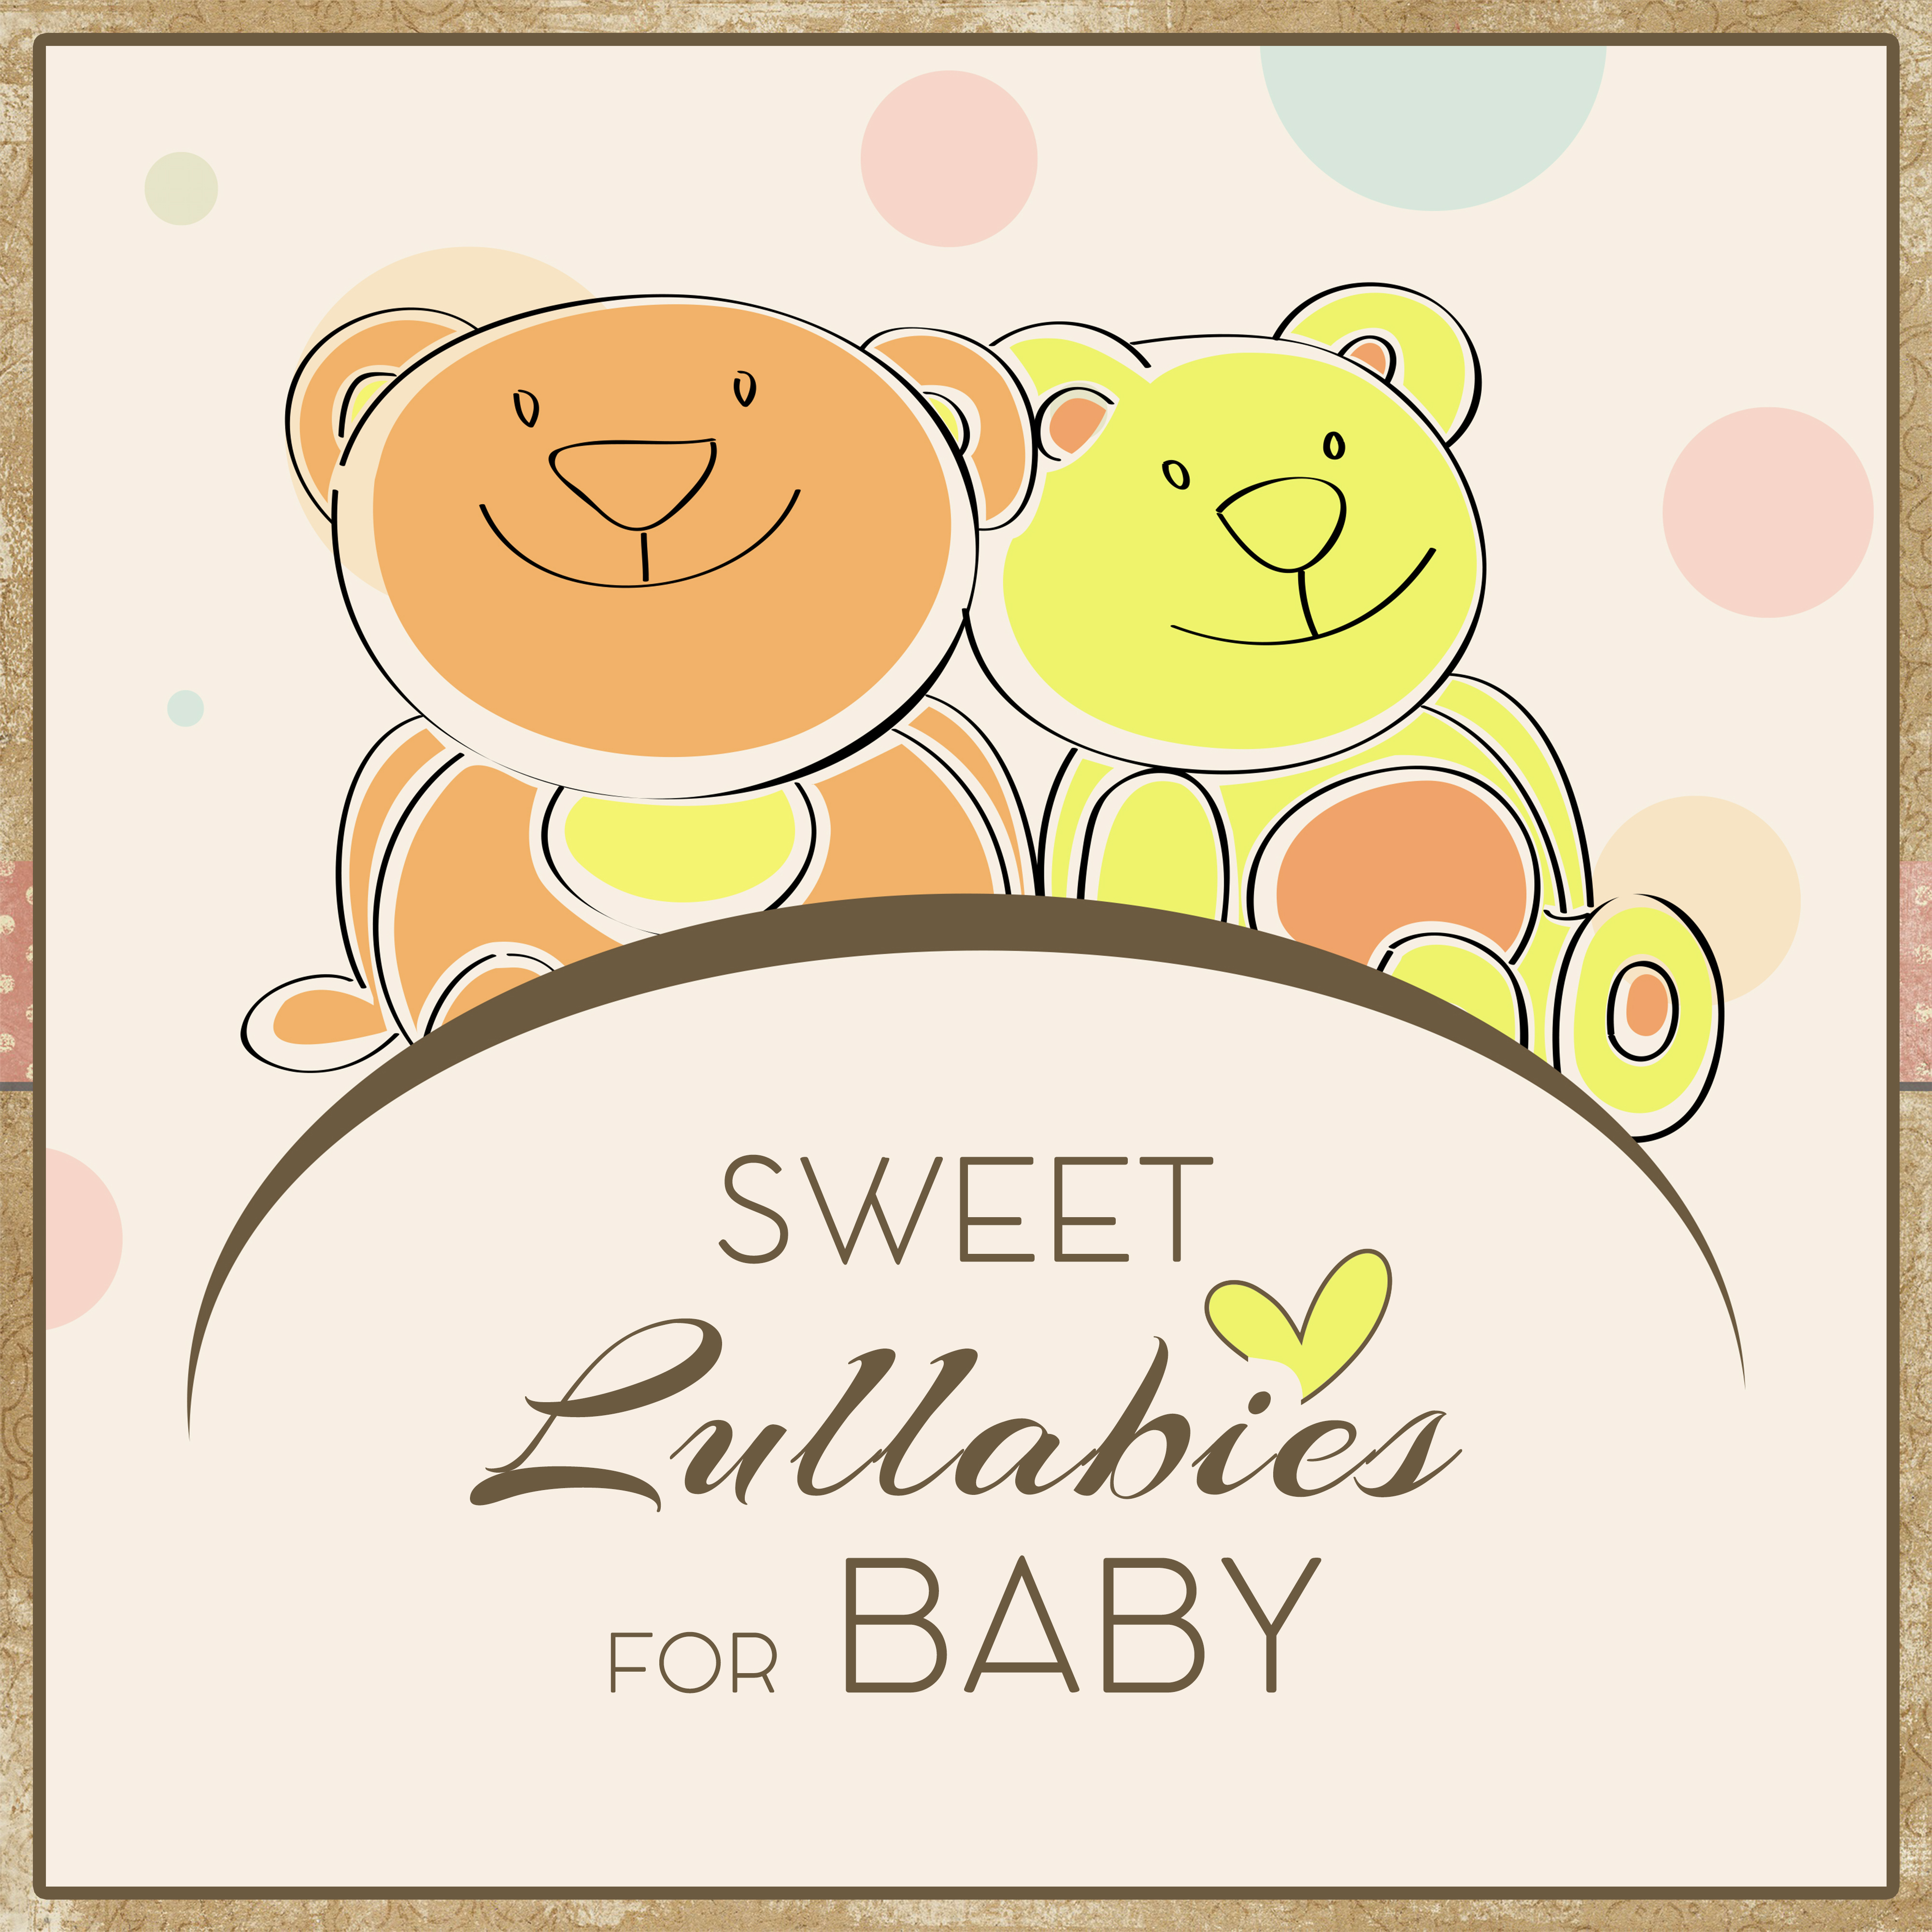 Sweet Lullabies for Baby  Relaxing Music at Goodnight, Calm Nap, Healing Music, Restful Sleep, Bedtime